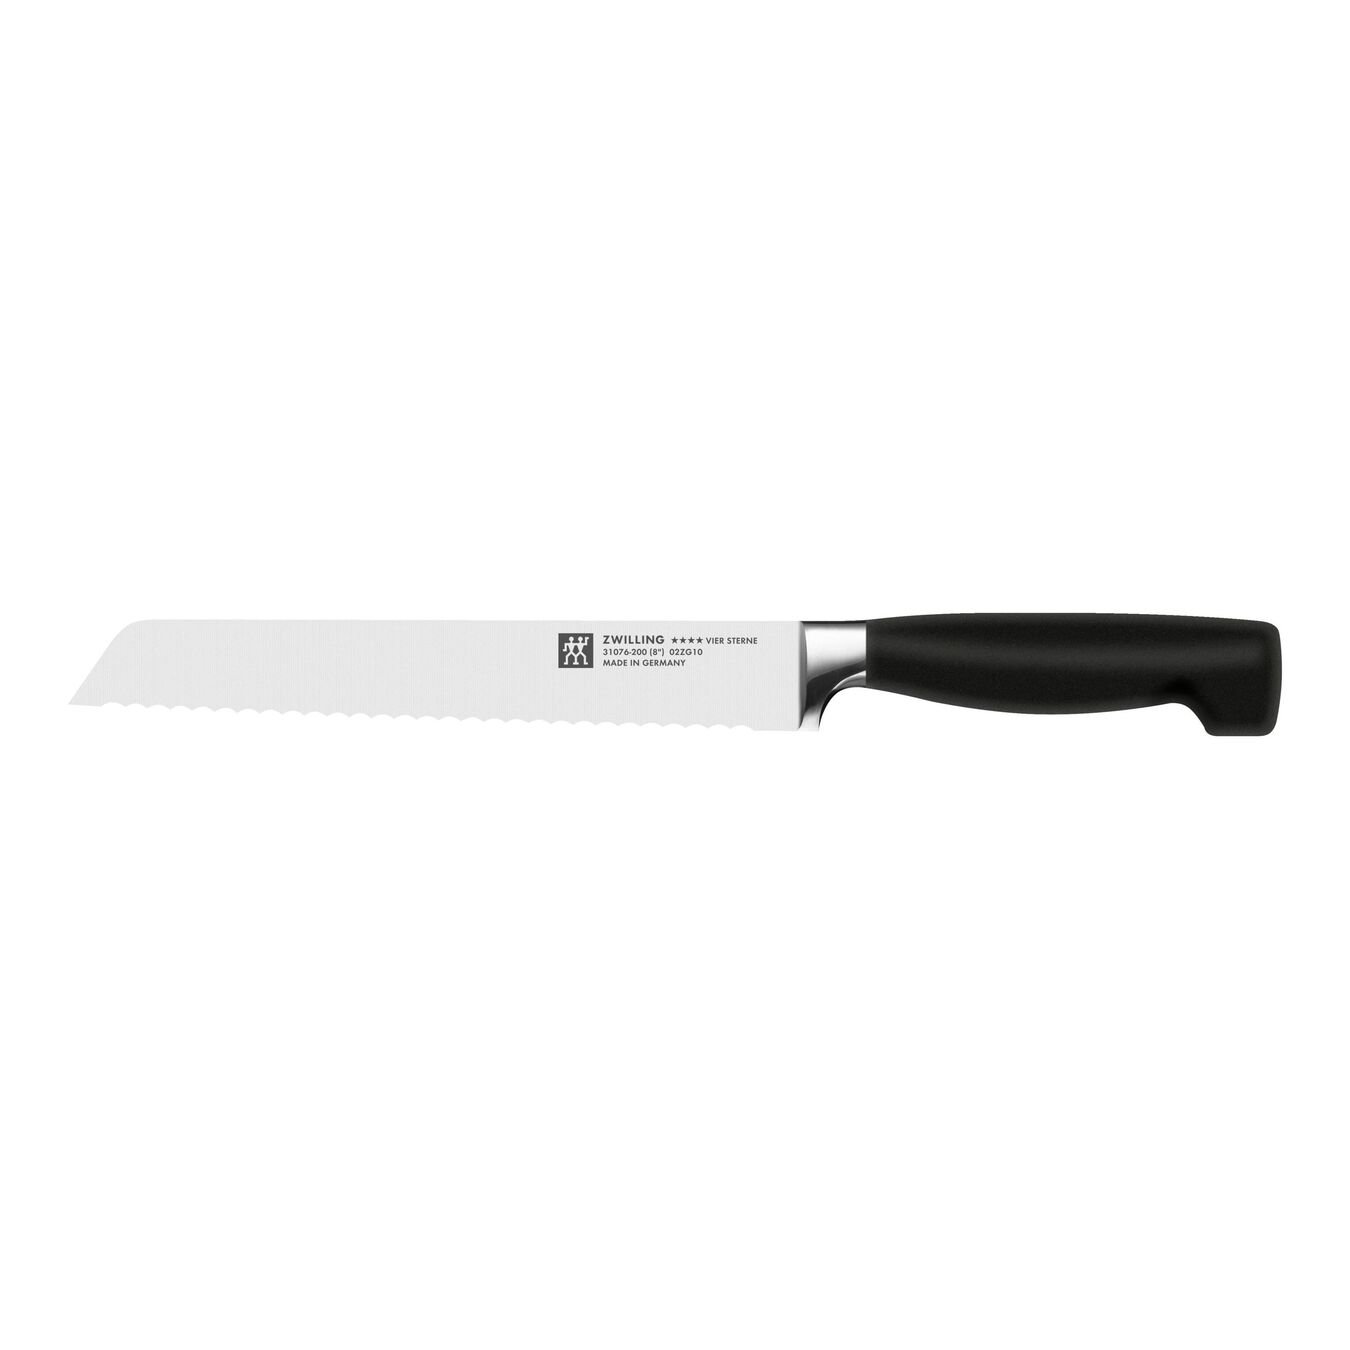 8 inch Bread knife - Visual Imperfections,,large 1